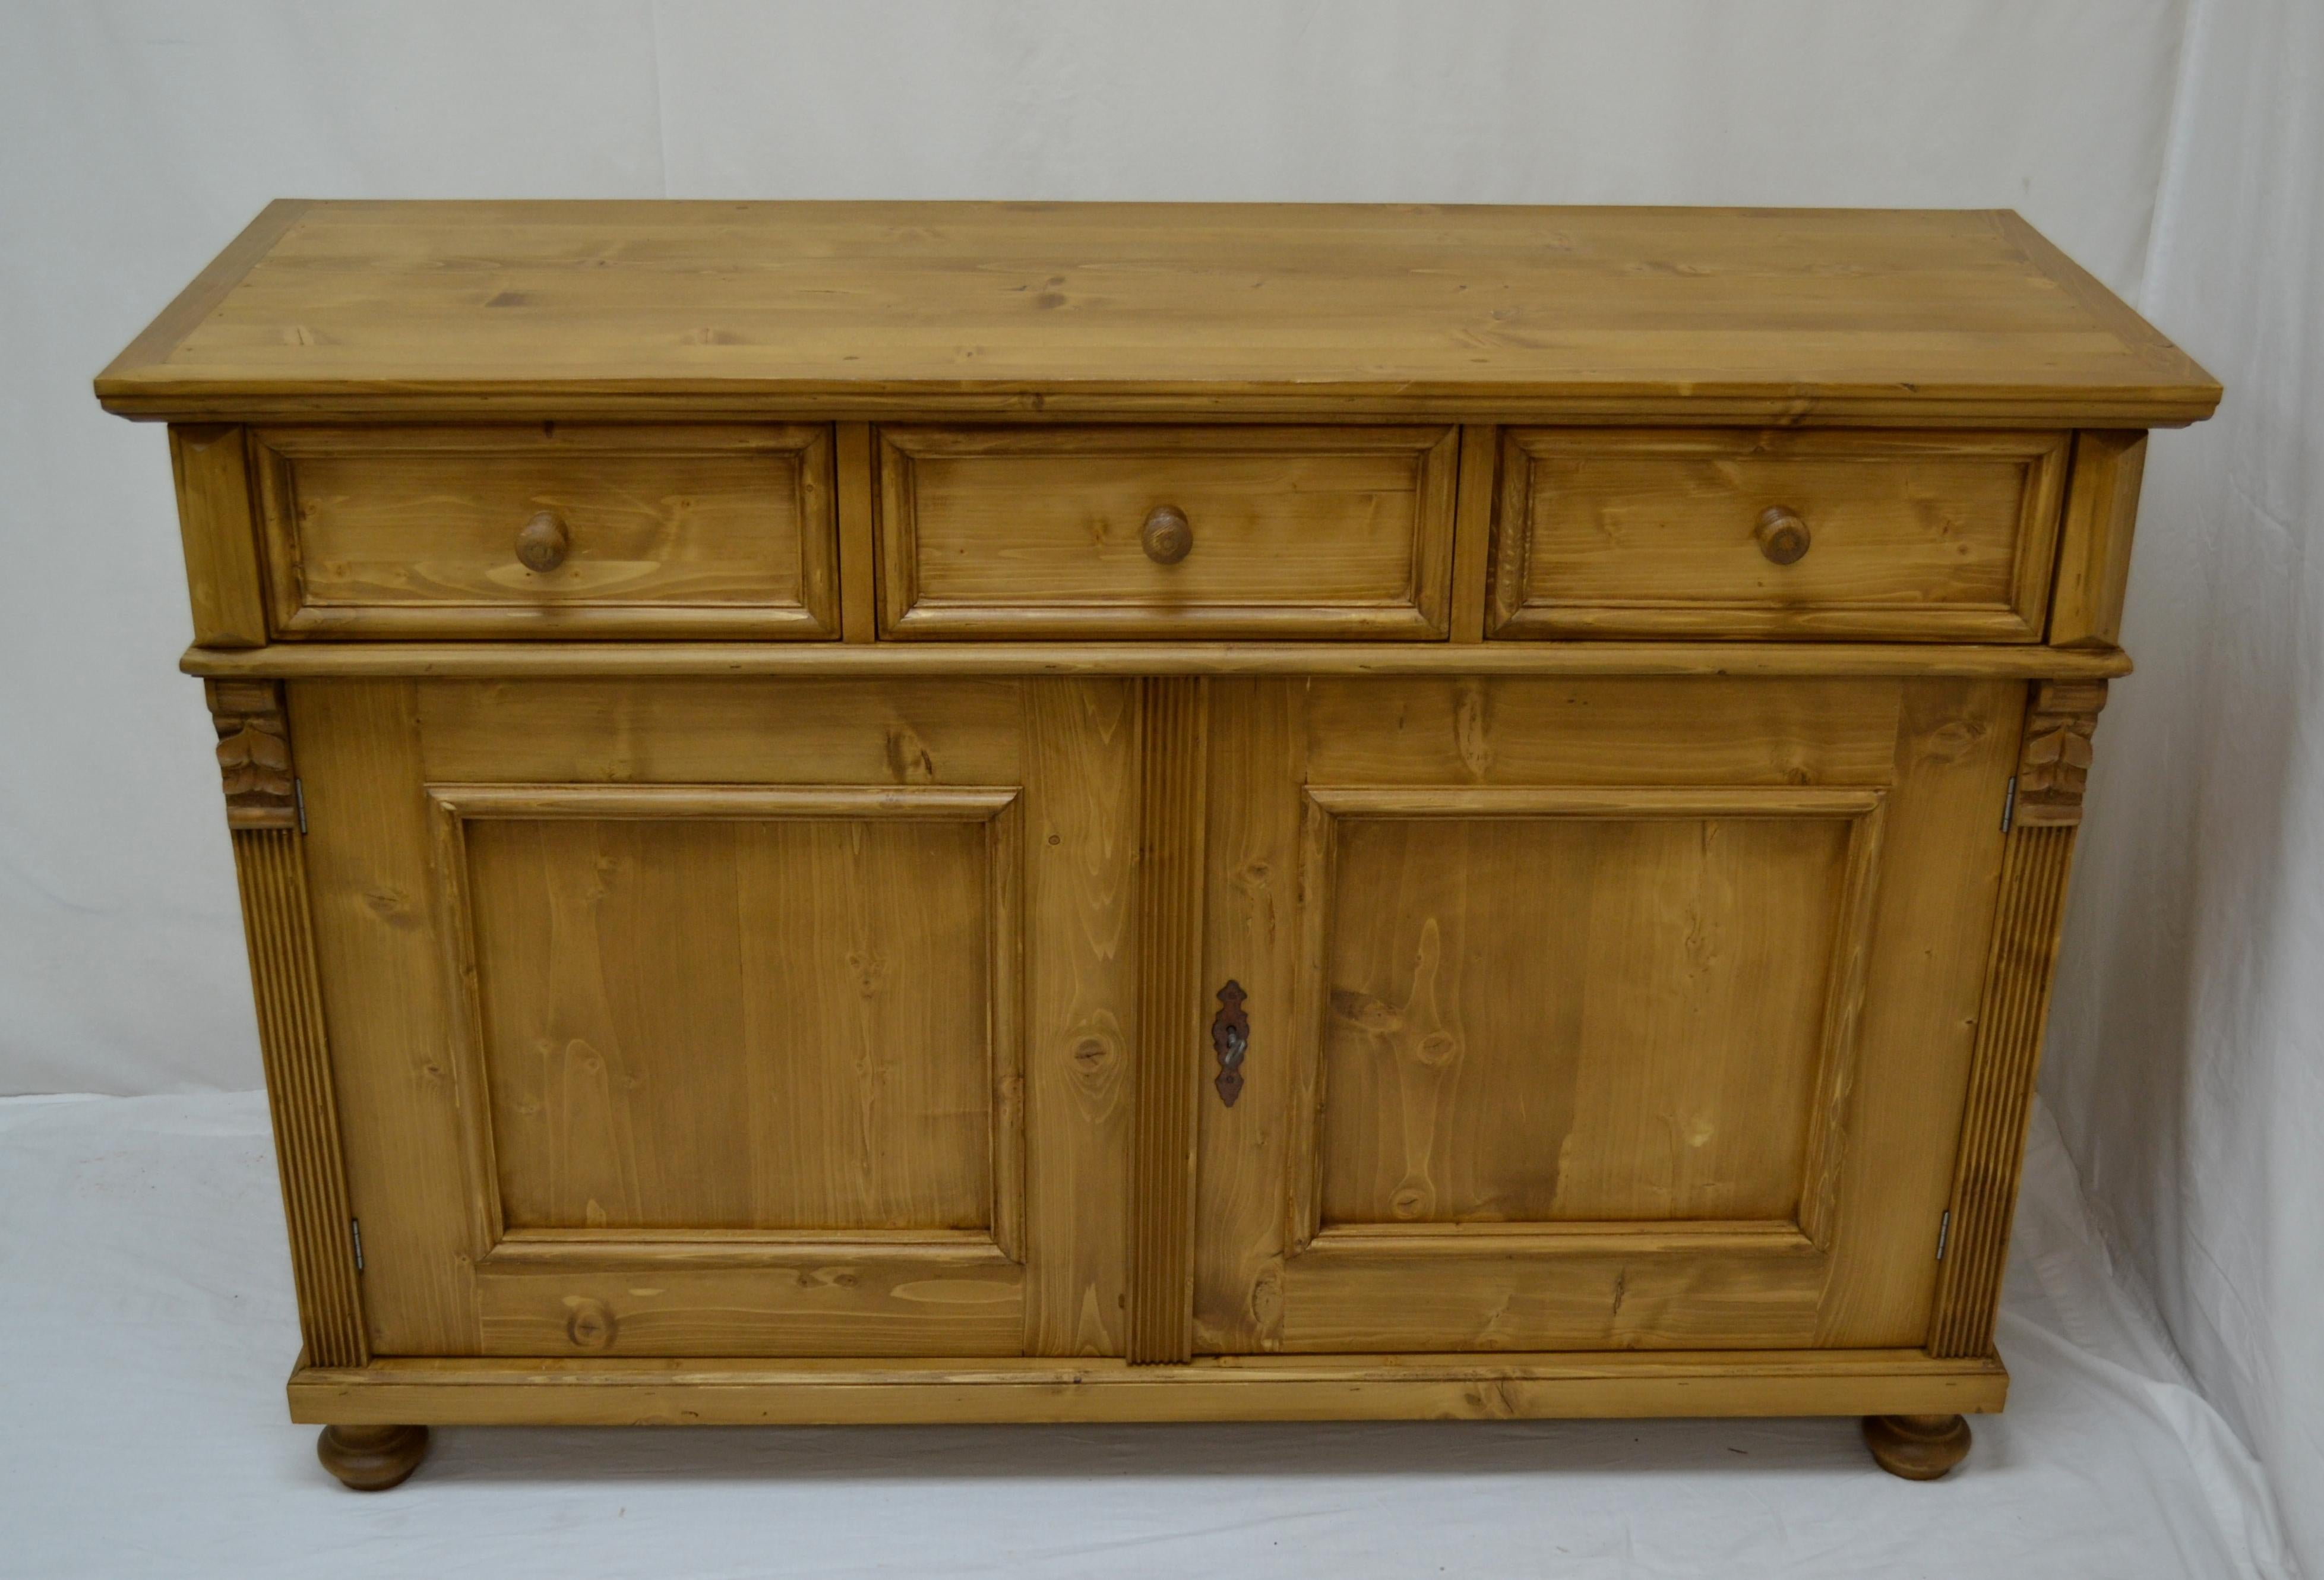 This is a shorter version of a popular Pine Mine sideboard design, this one with two doors and three drawers. Built in central Europe from lightly-used reclaimed pine, this most versatile piece works well as a single or double vanity in the